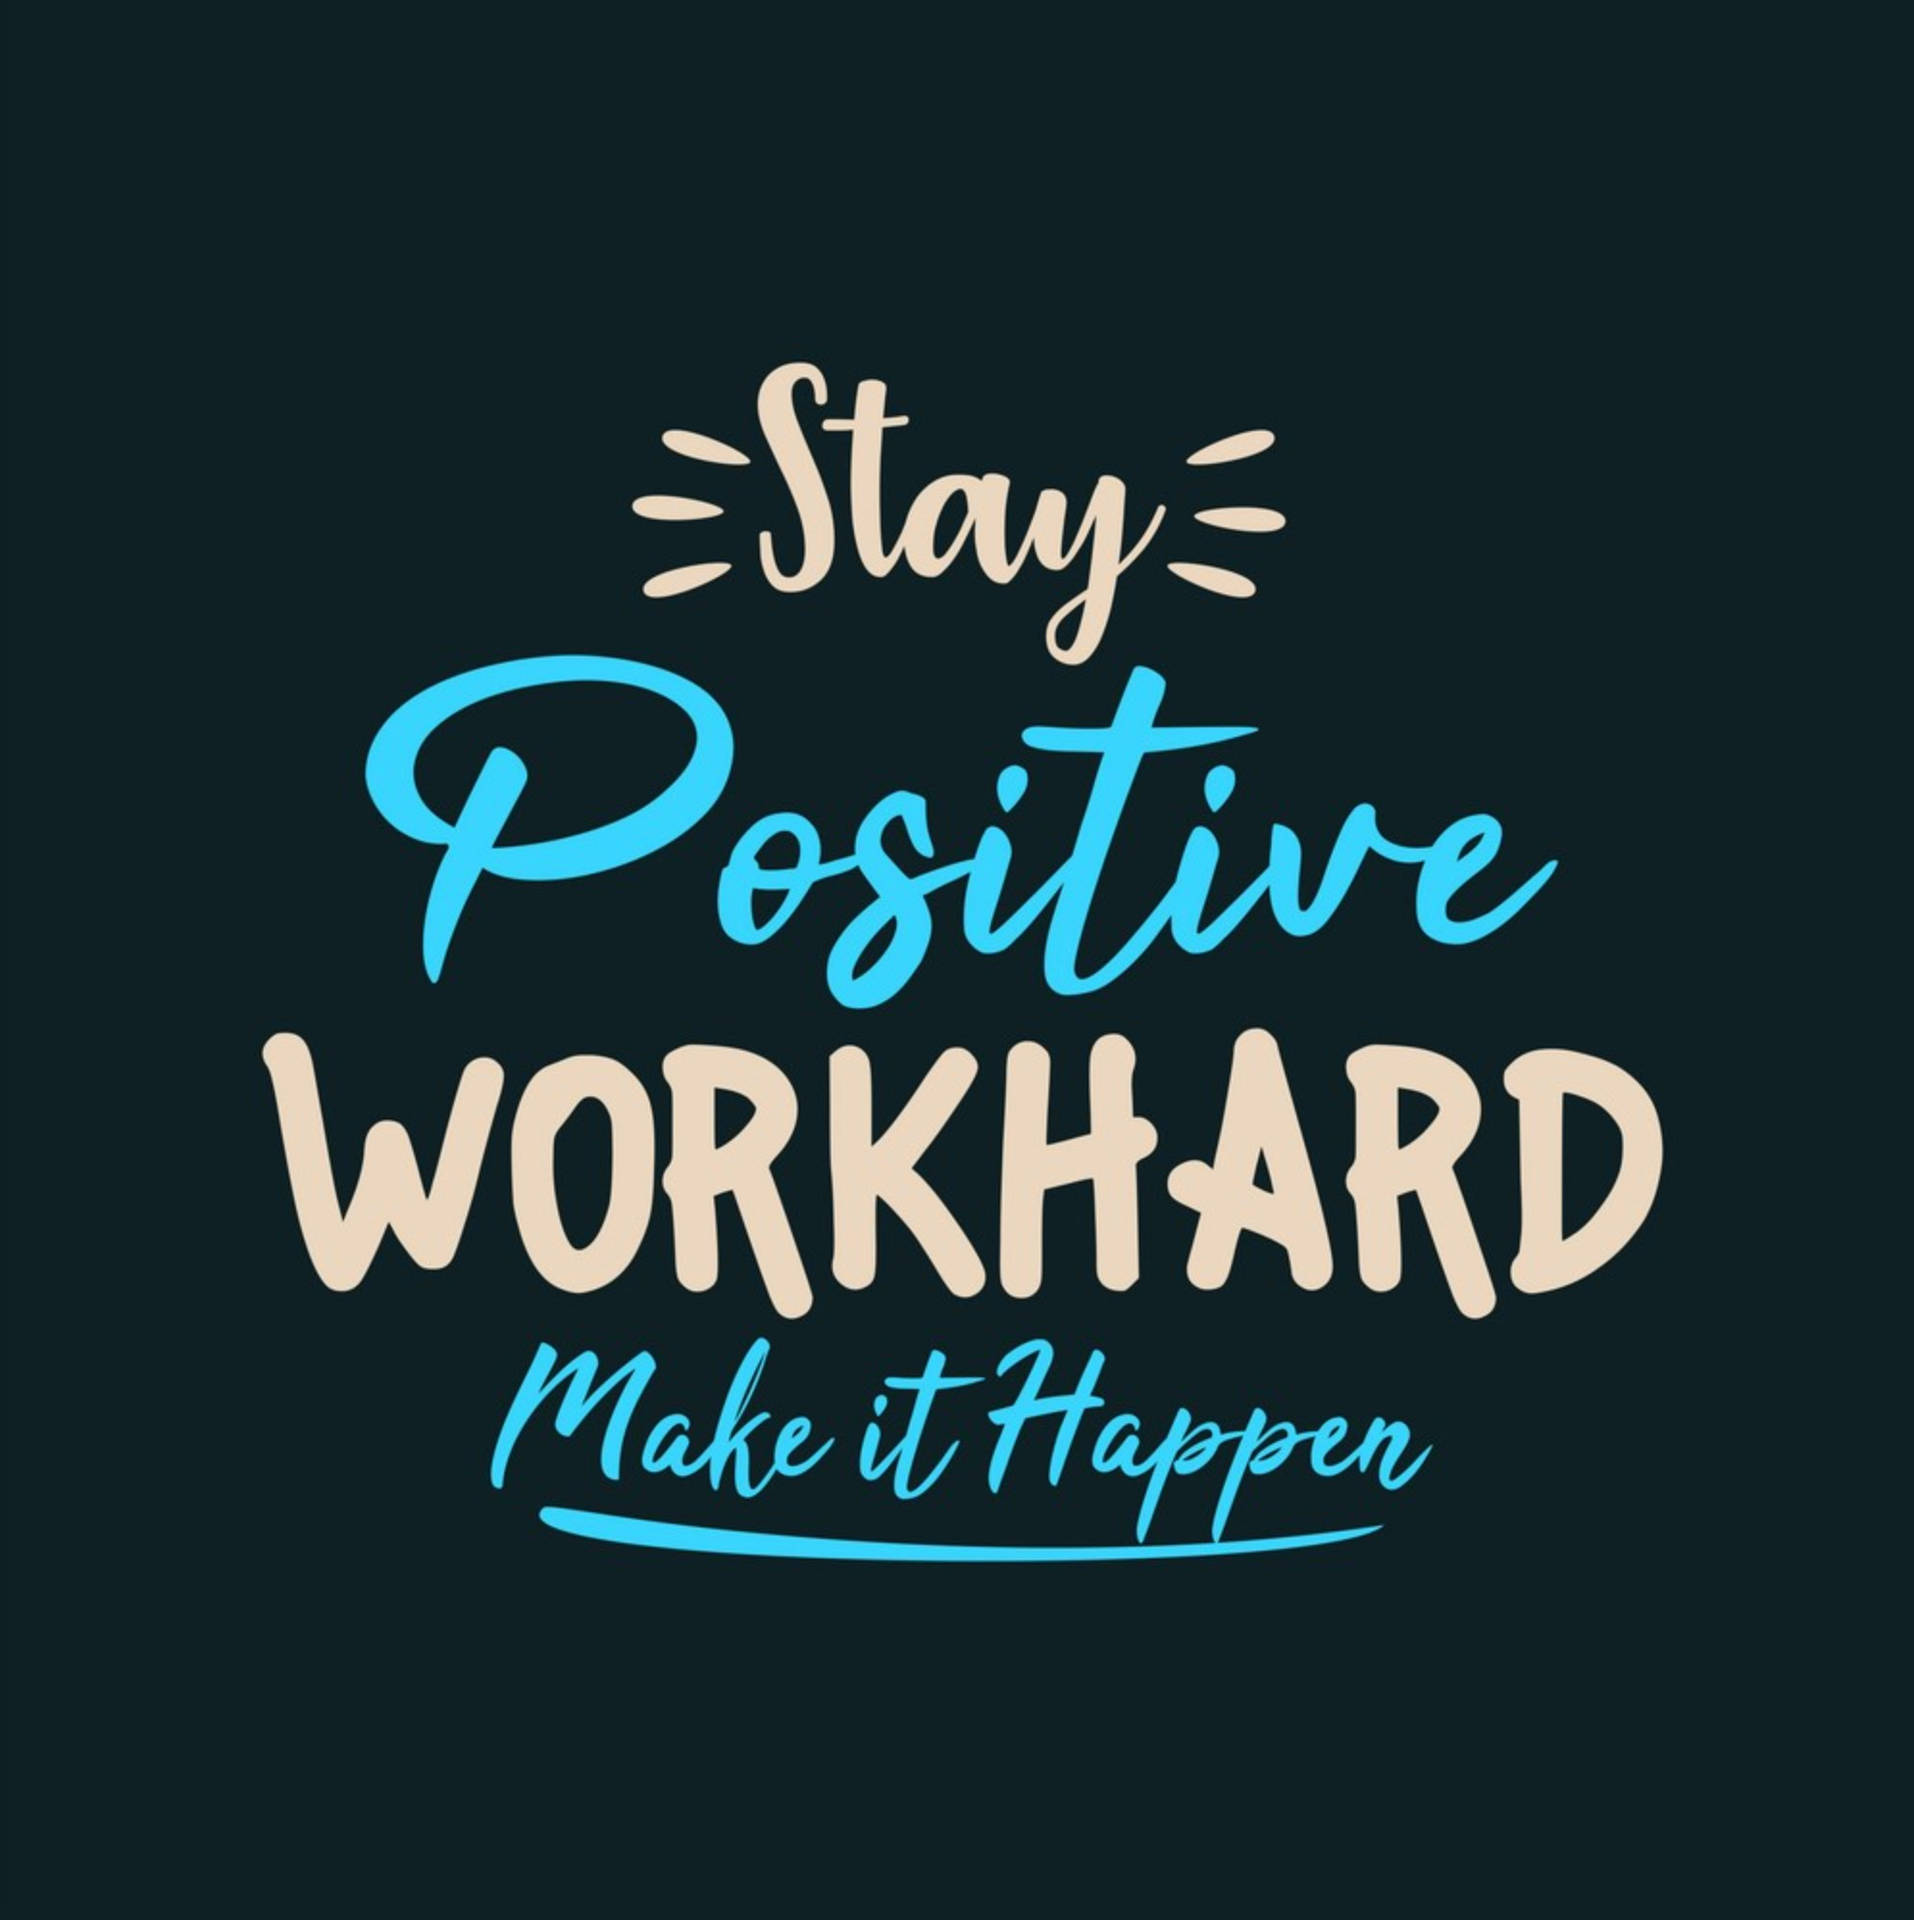 Free Positive Quotes Wallpaper Downloads, Positive Quotes Wallpaper for FREE